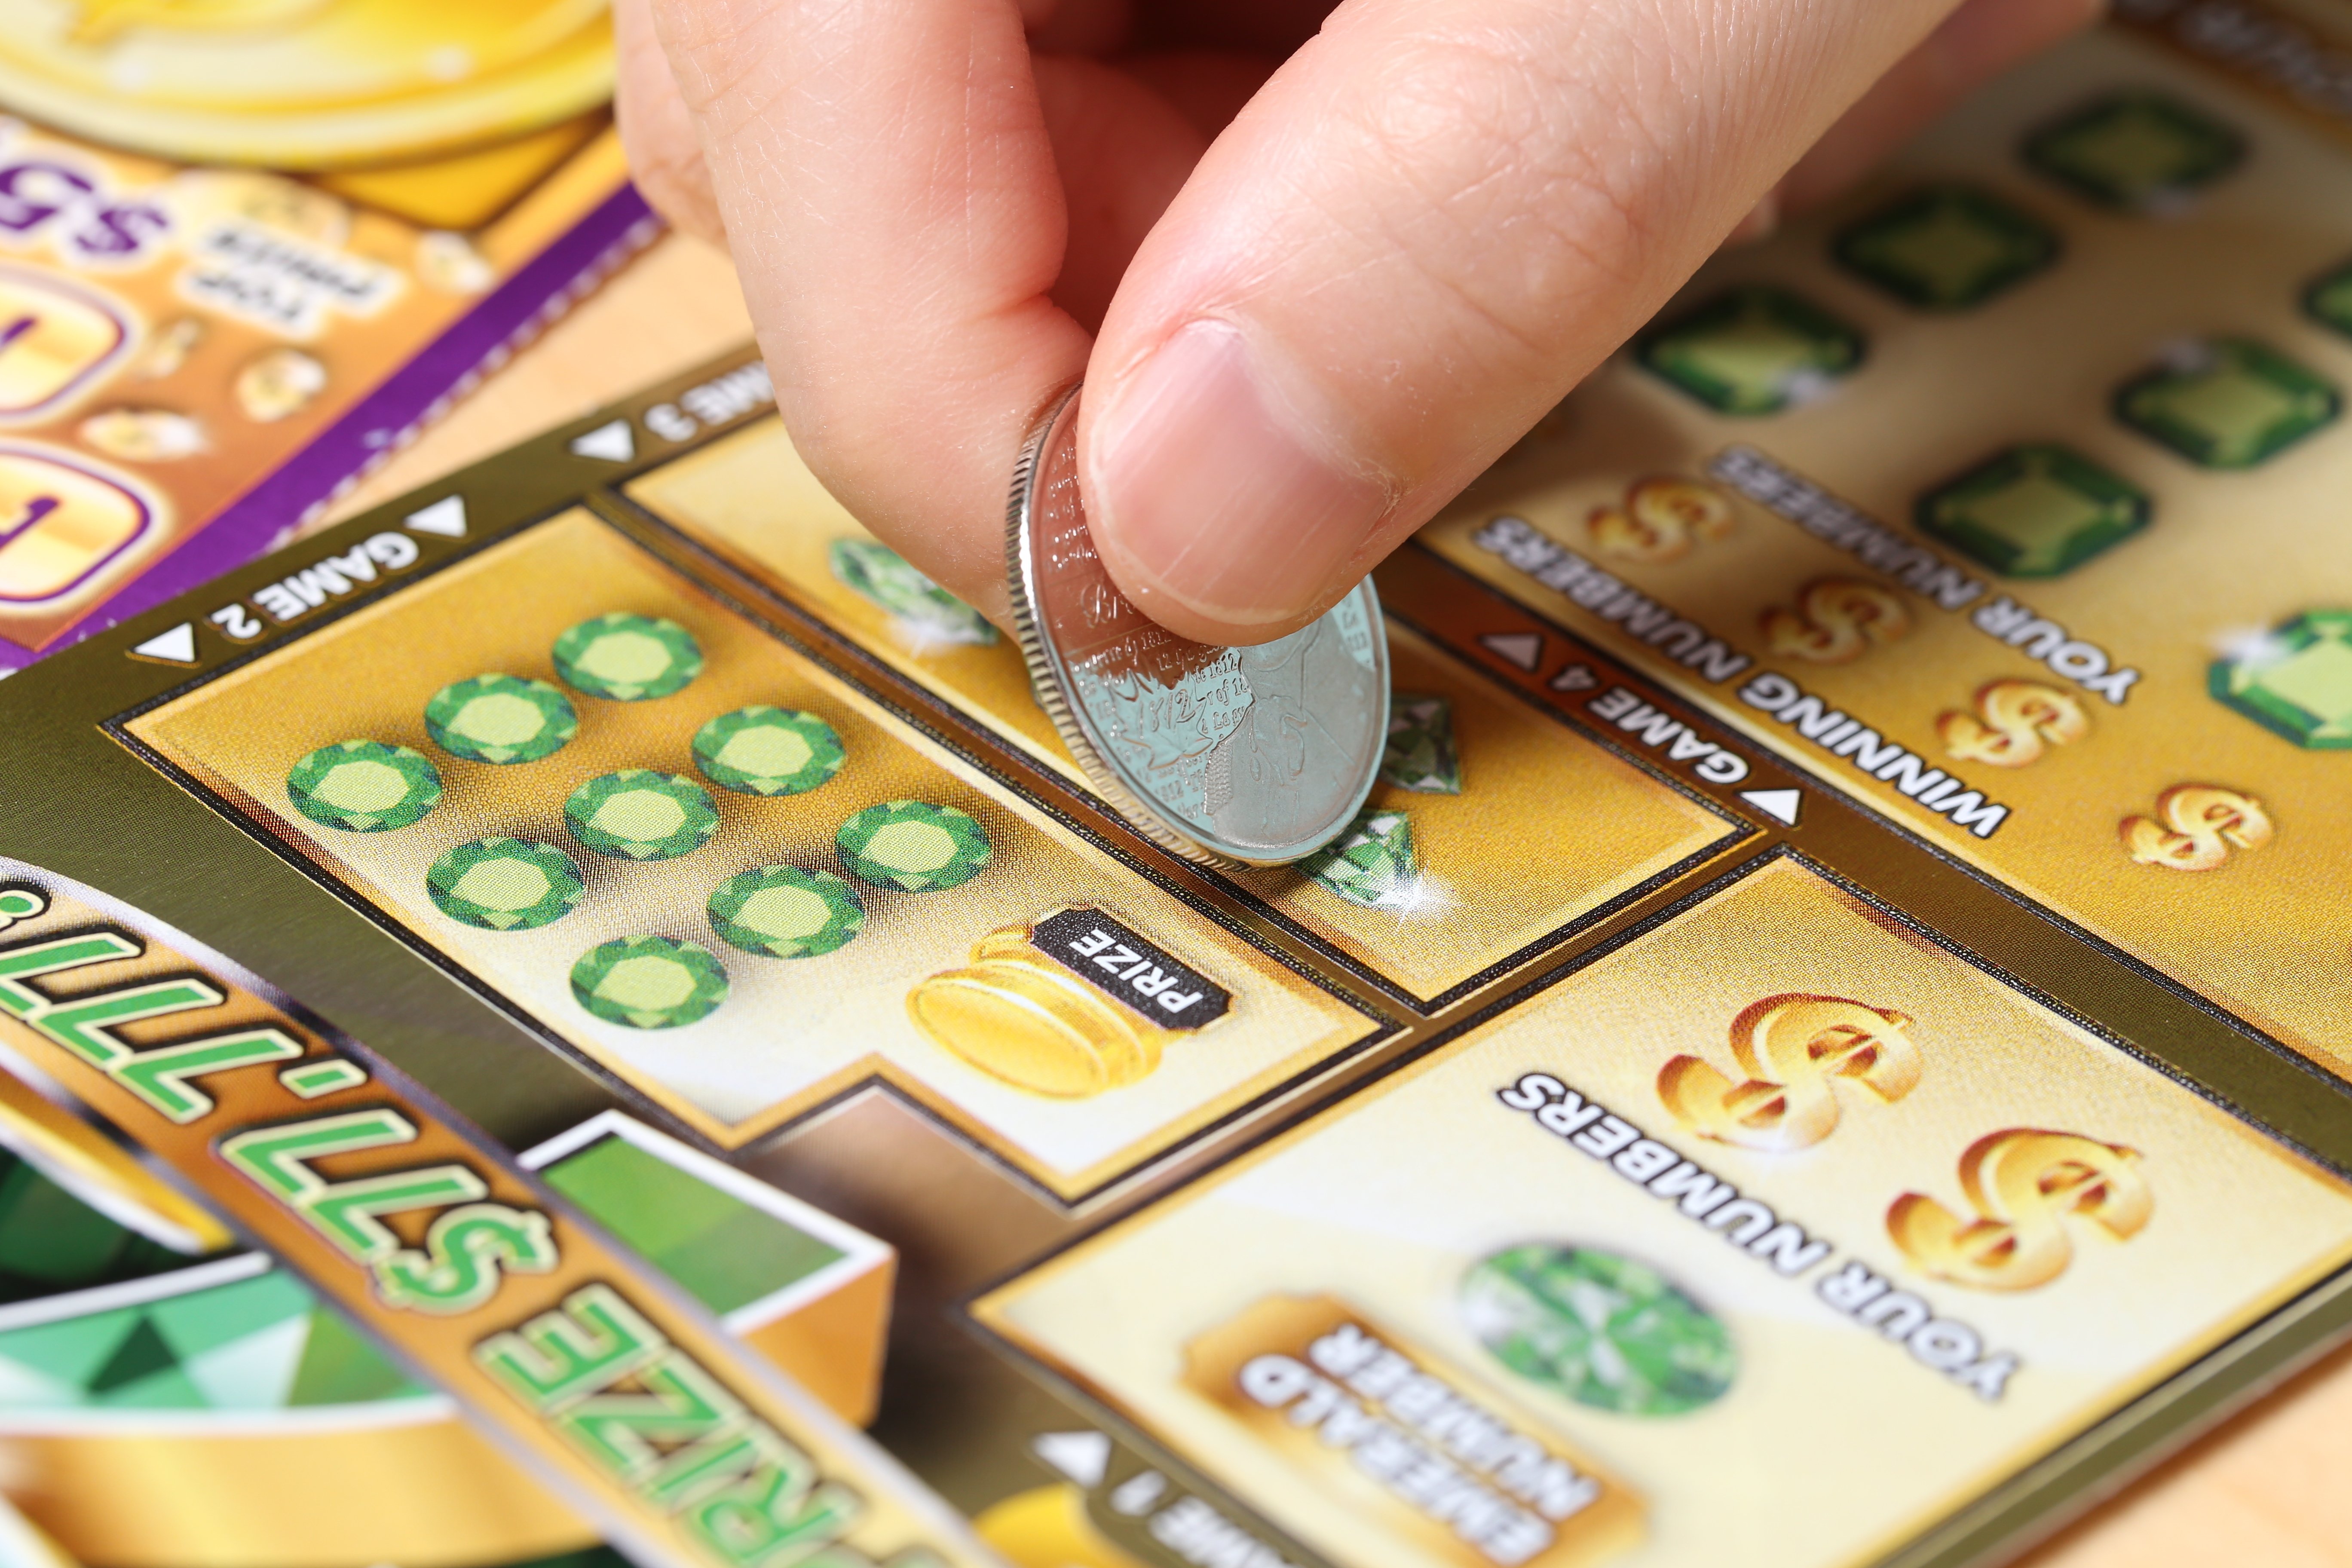 A lottery ticket being scratched | Photo: Shutterstock